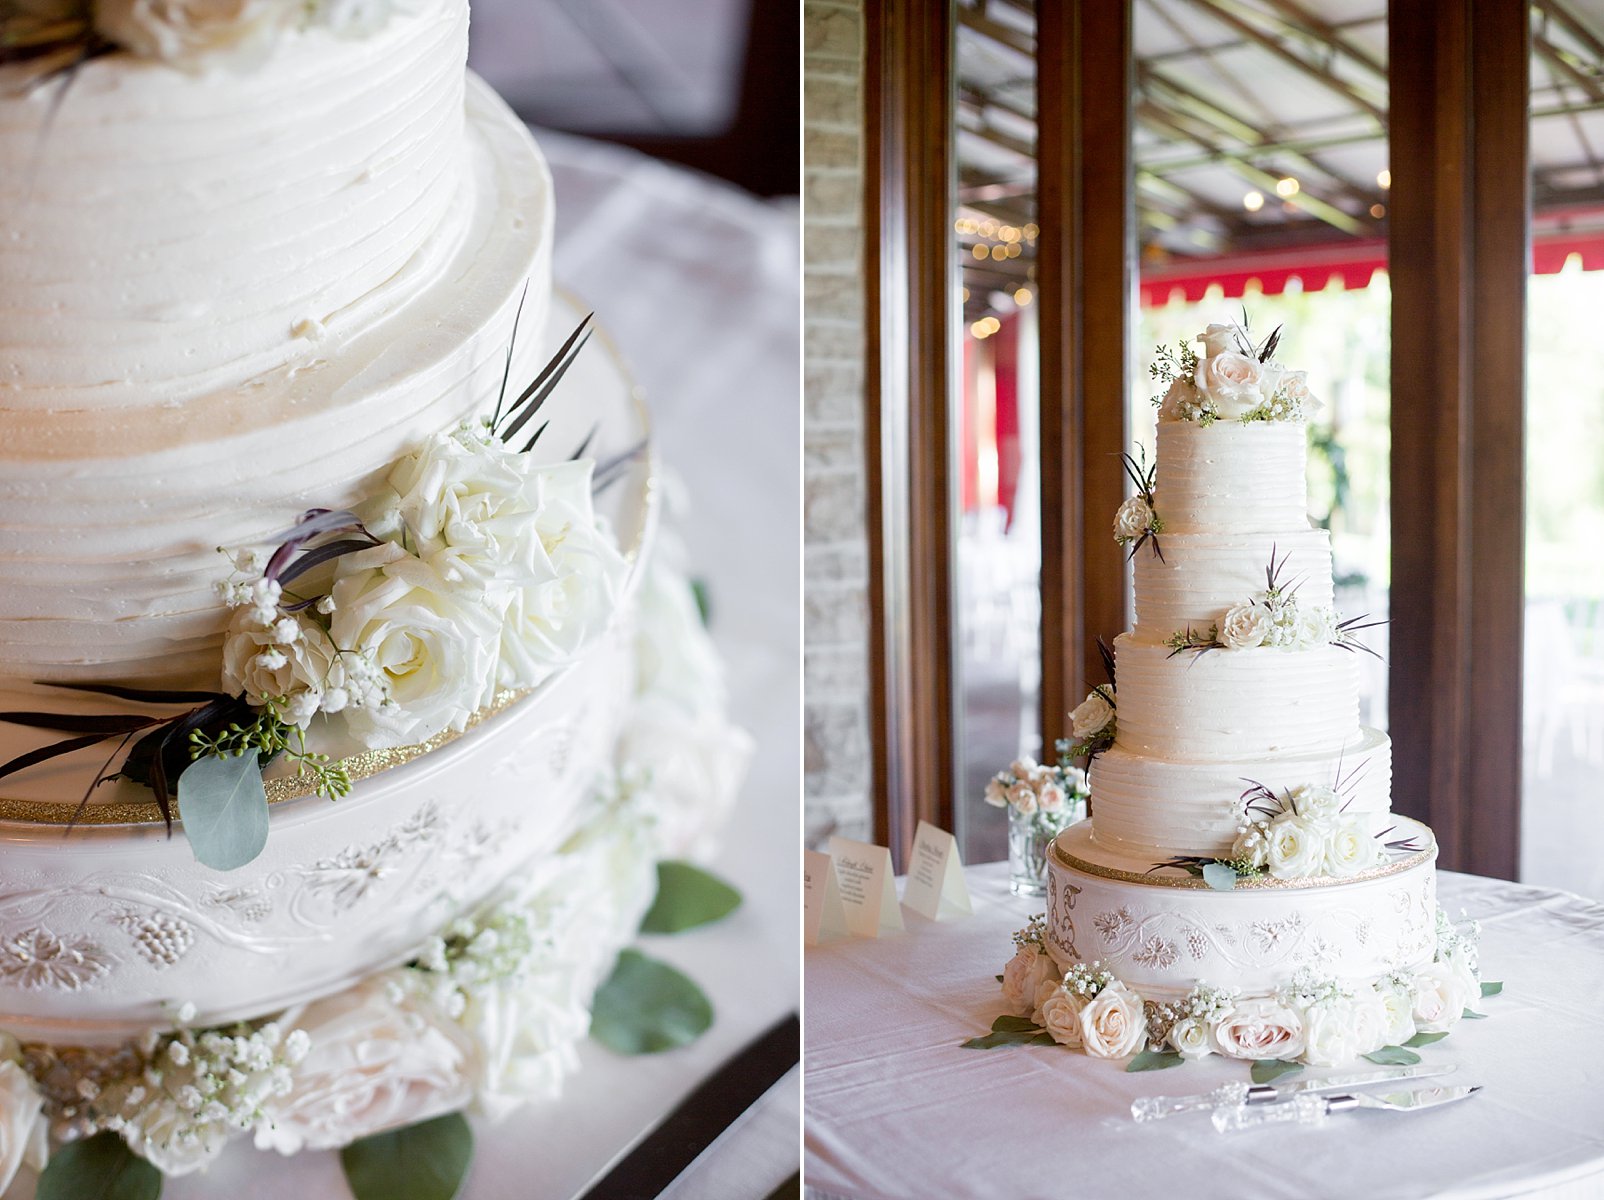 wedding cake at cherry hills country club